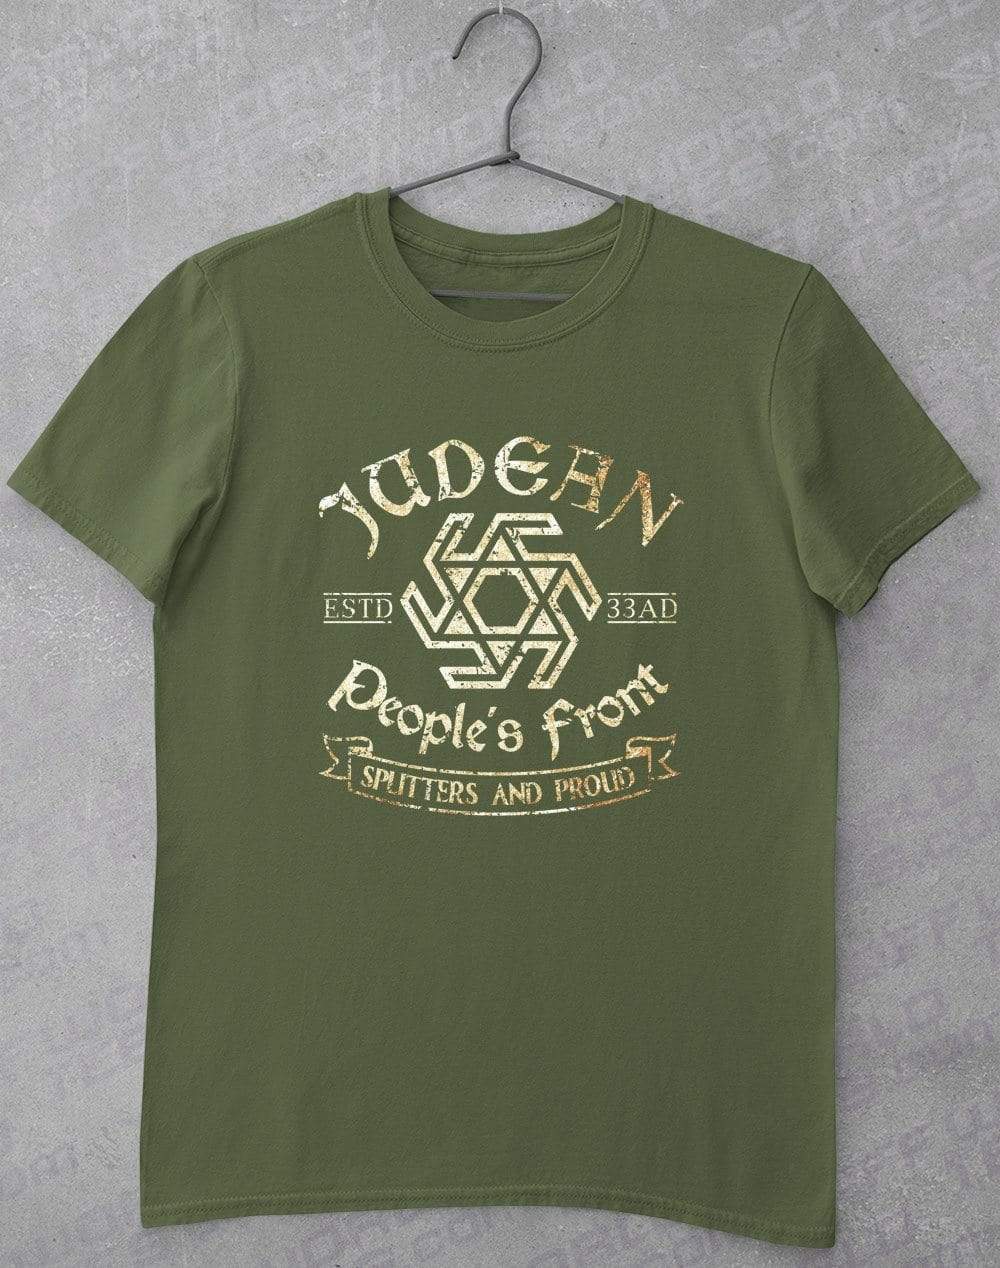 Judean People's Front T Shirt S / Military Green  - Off World Tees